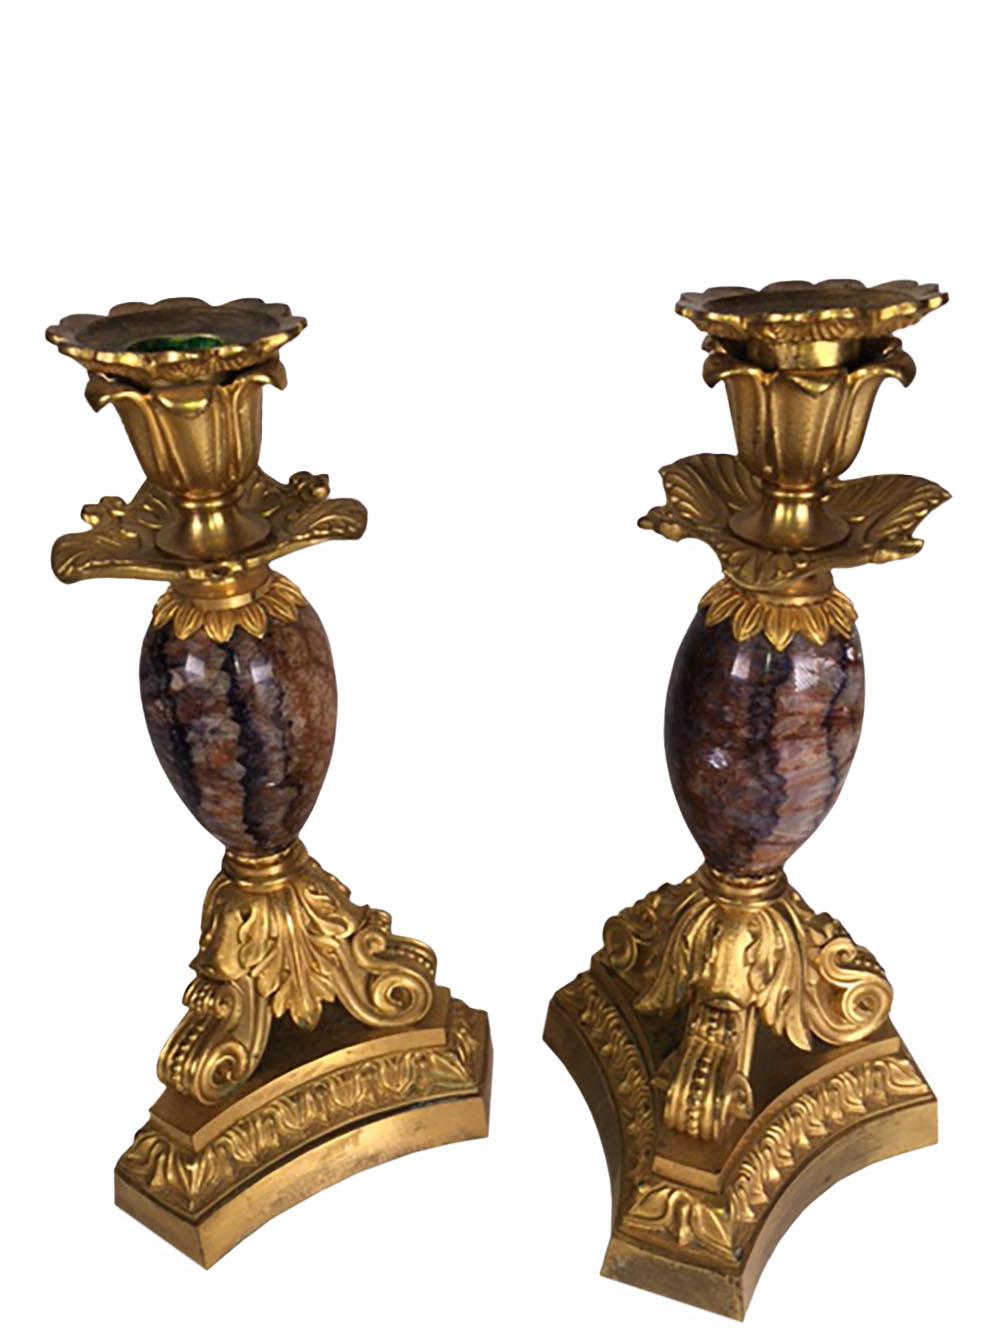 A pair of Louis XV style Derbyshire blue John with bronze doré candlesticks. French, circa 1860.